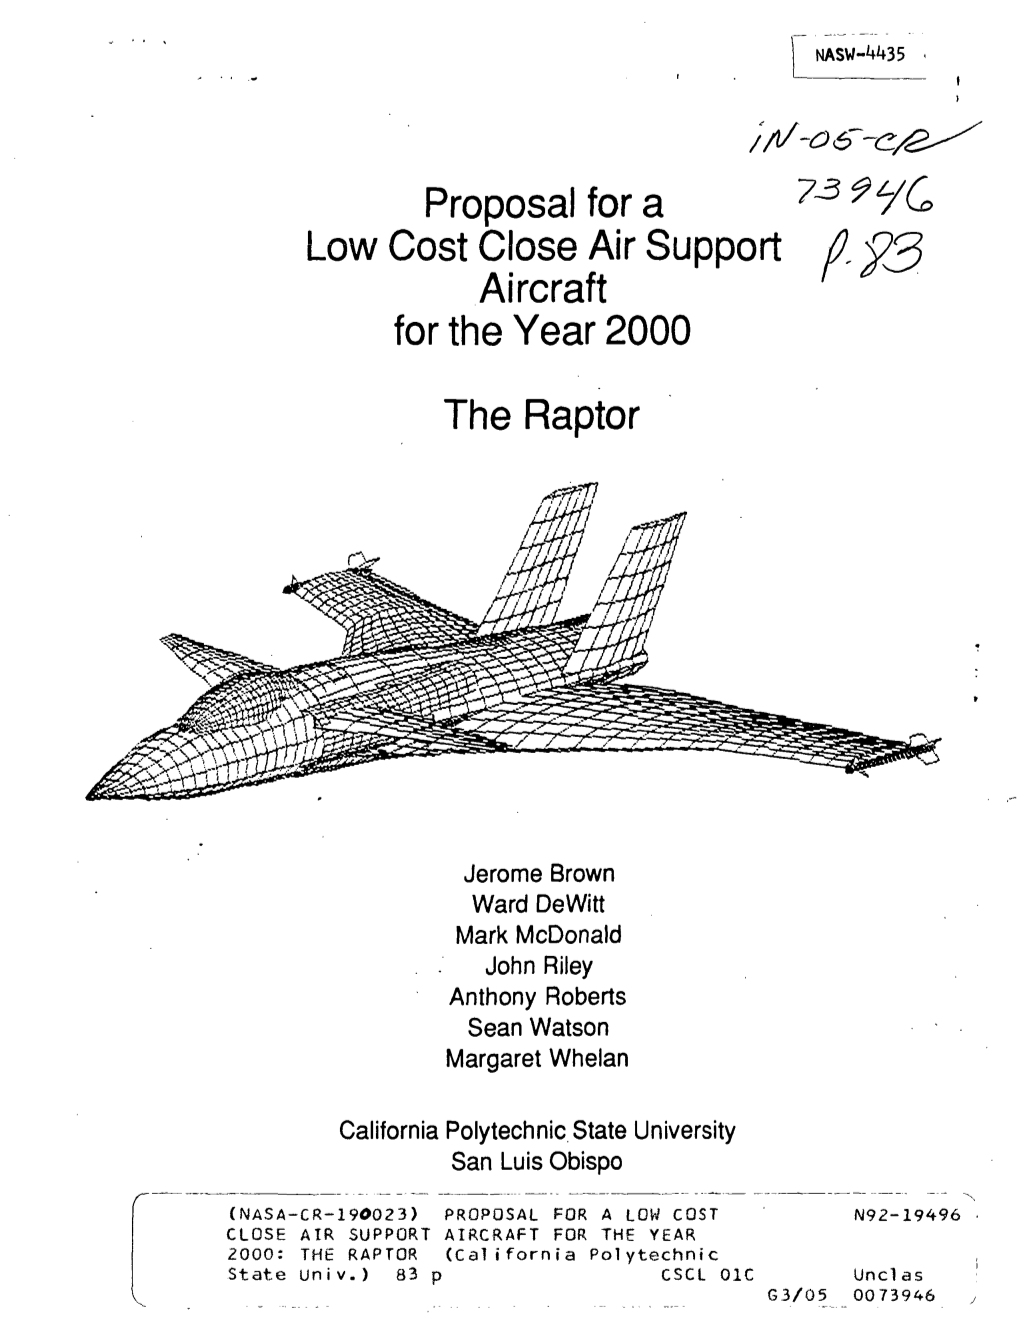 Proposal for a Low Cost Close Air Support Aircraft for the Year 2000